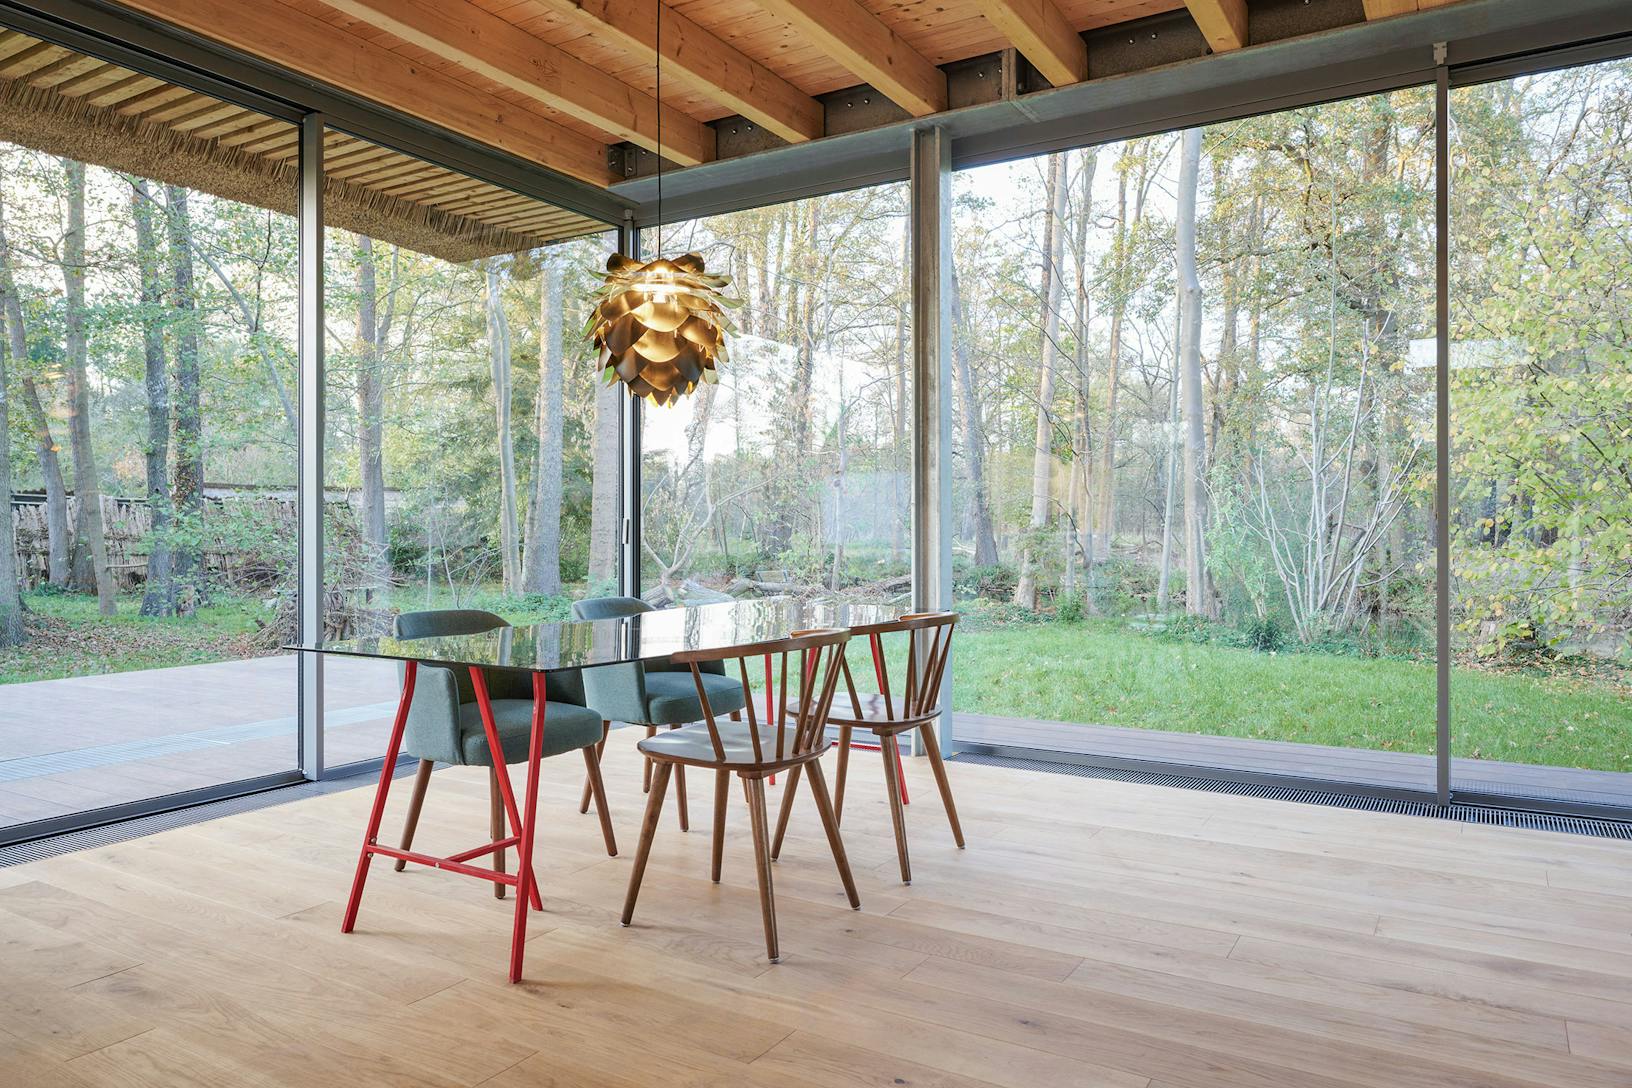 A dining room with minimal sliding glass walls, allowing abundant natural light to flood the space